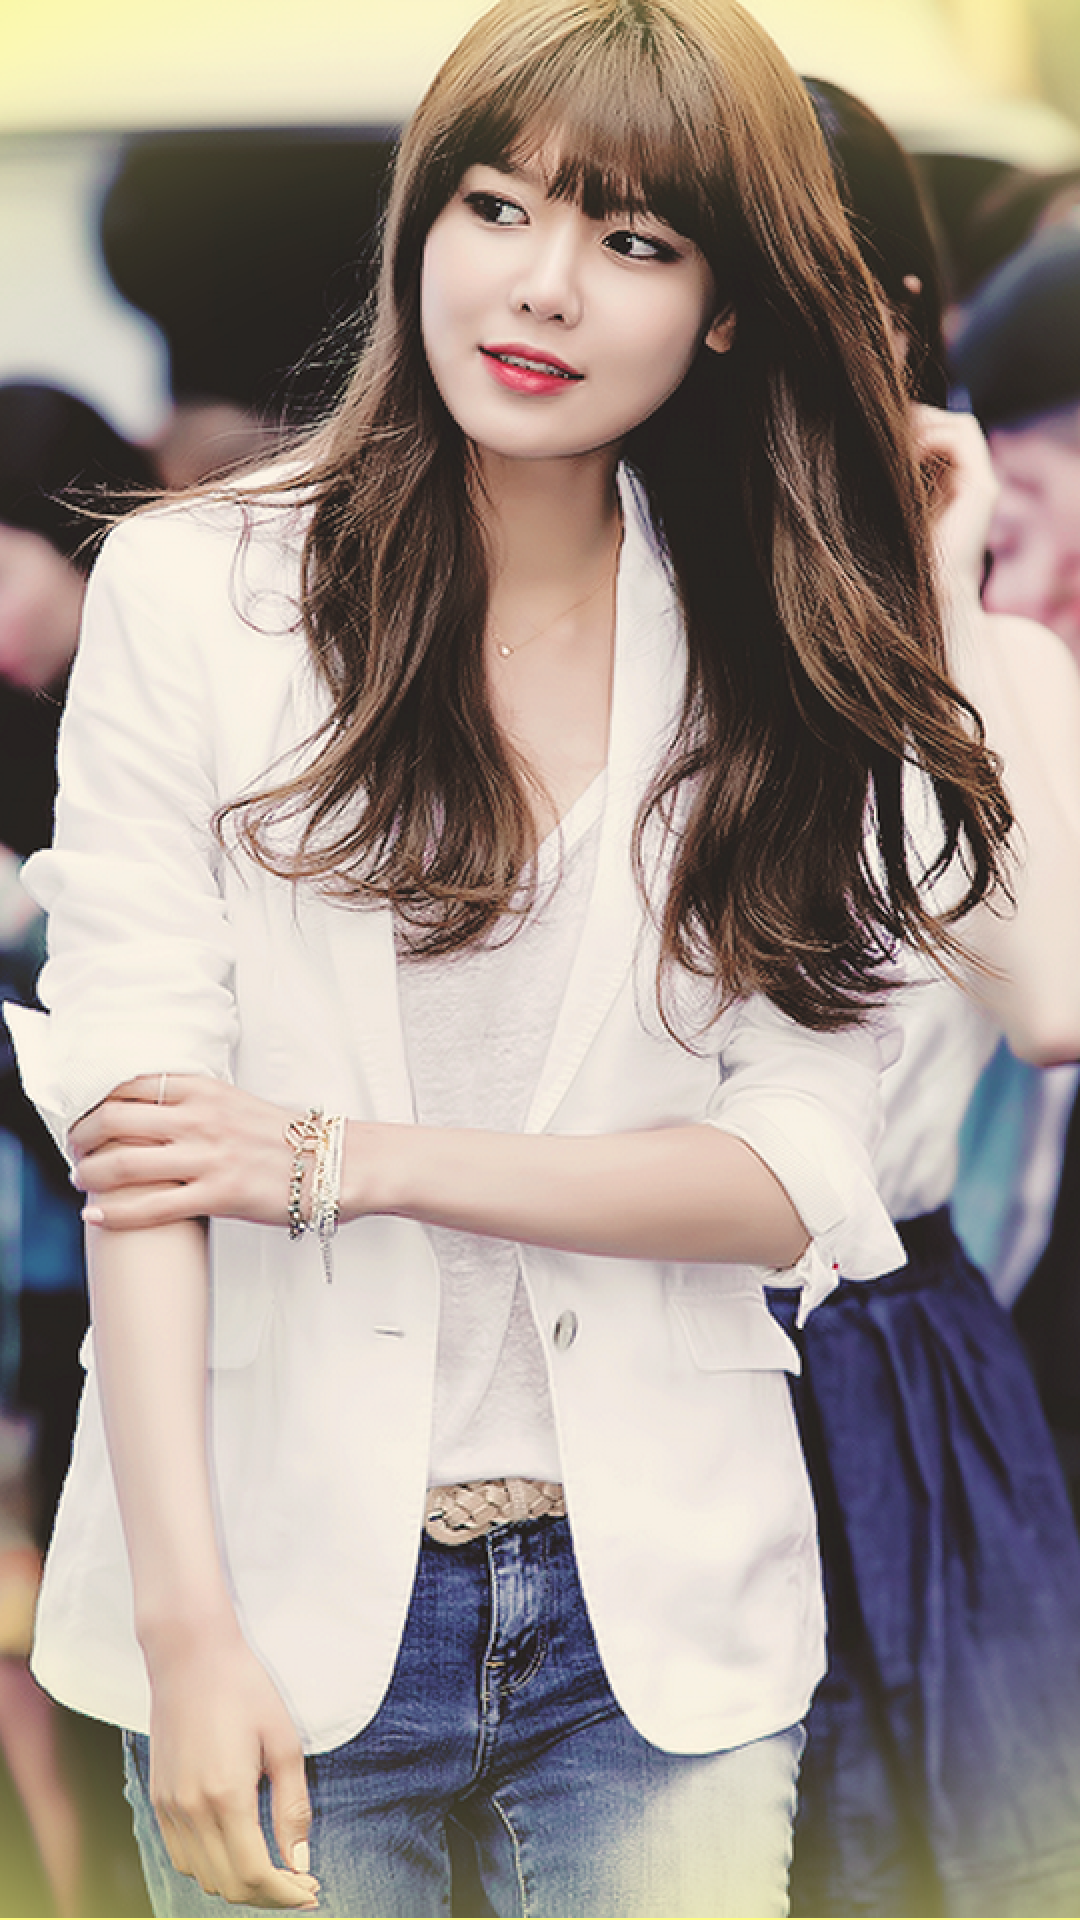 SooYoung Gee Japanese - Choi Sooyoung wallpaper (31055722) - fanpop